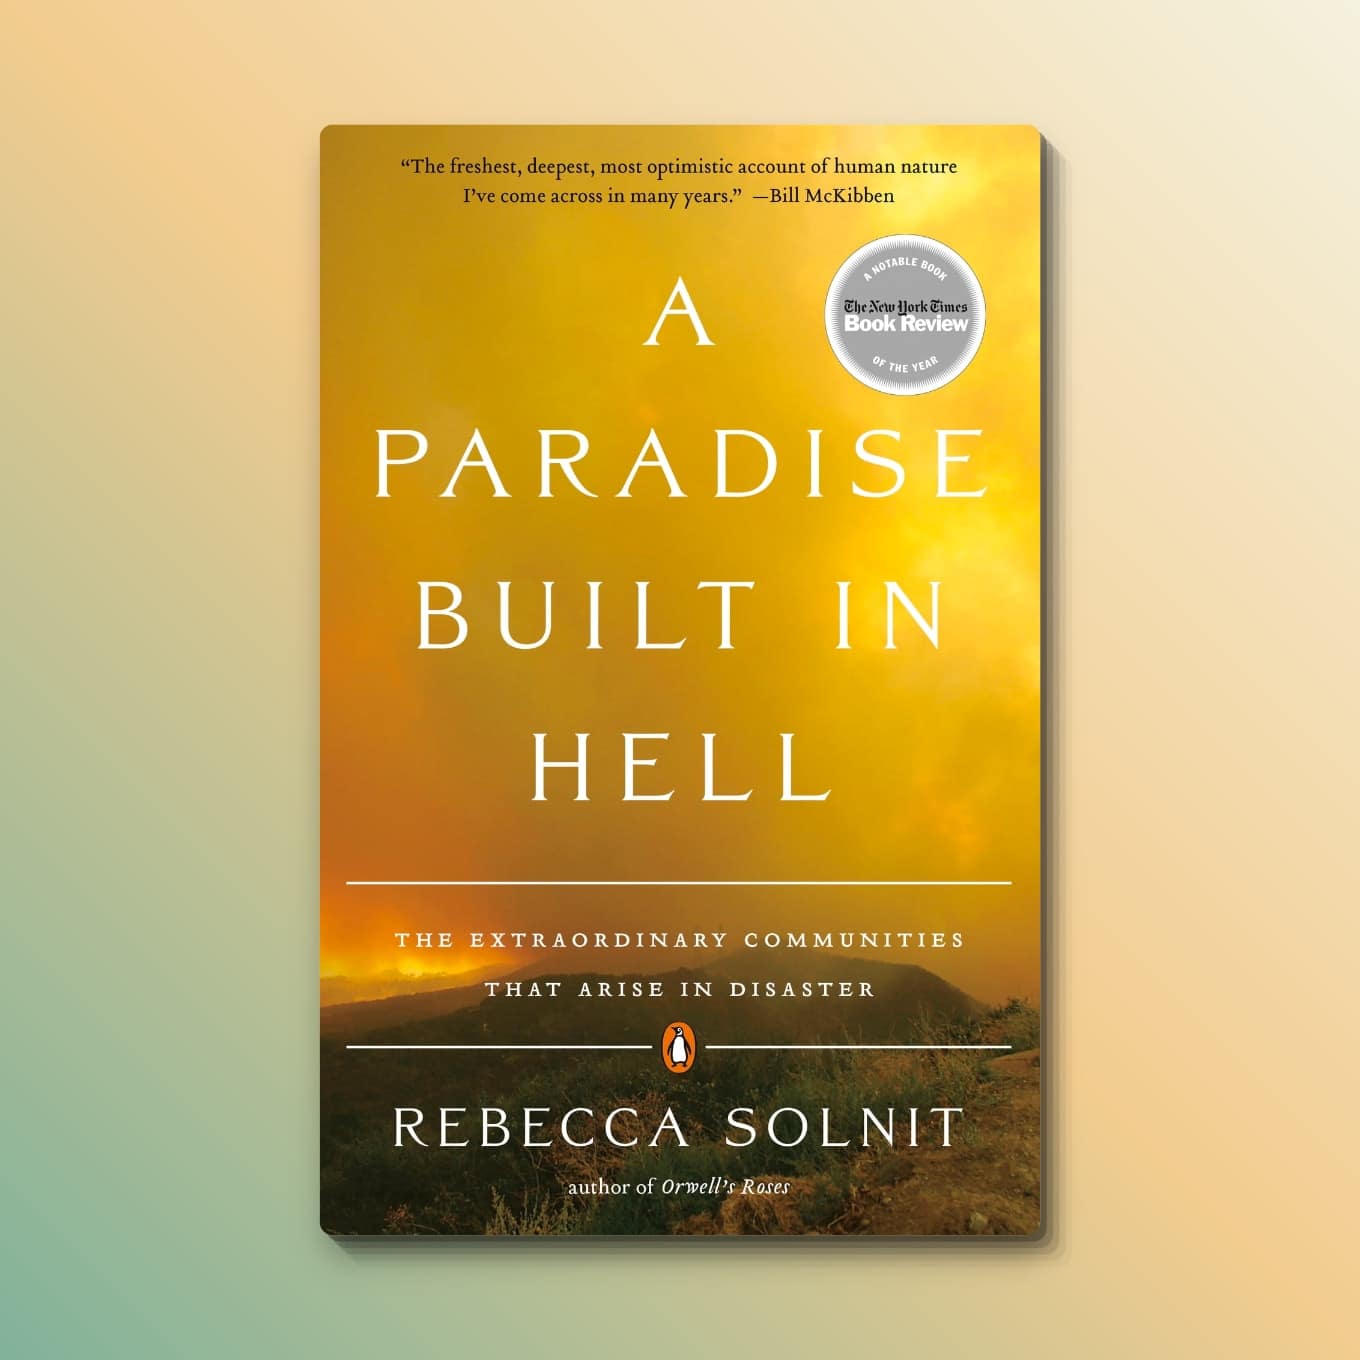 “A Paradise Built in Hell: The Extraordinary Communities That Arise in Disaster” by Rebecca Solnit